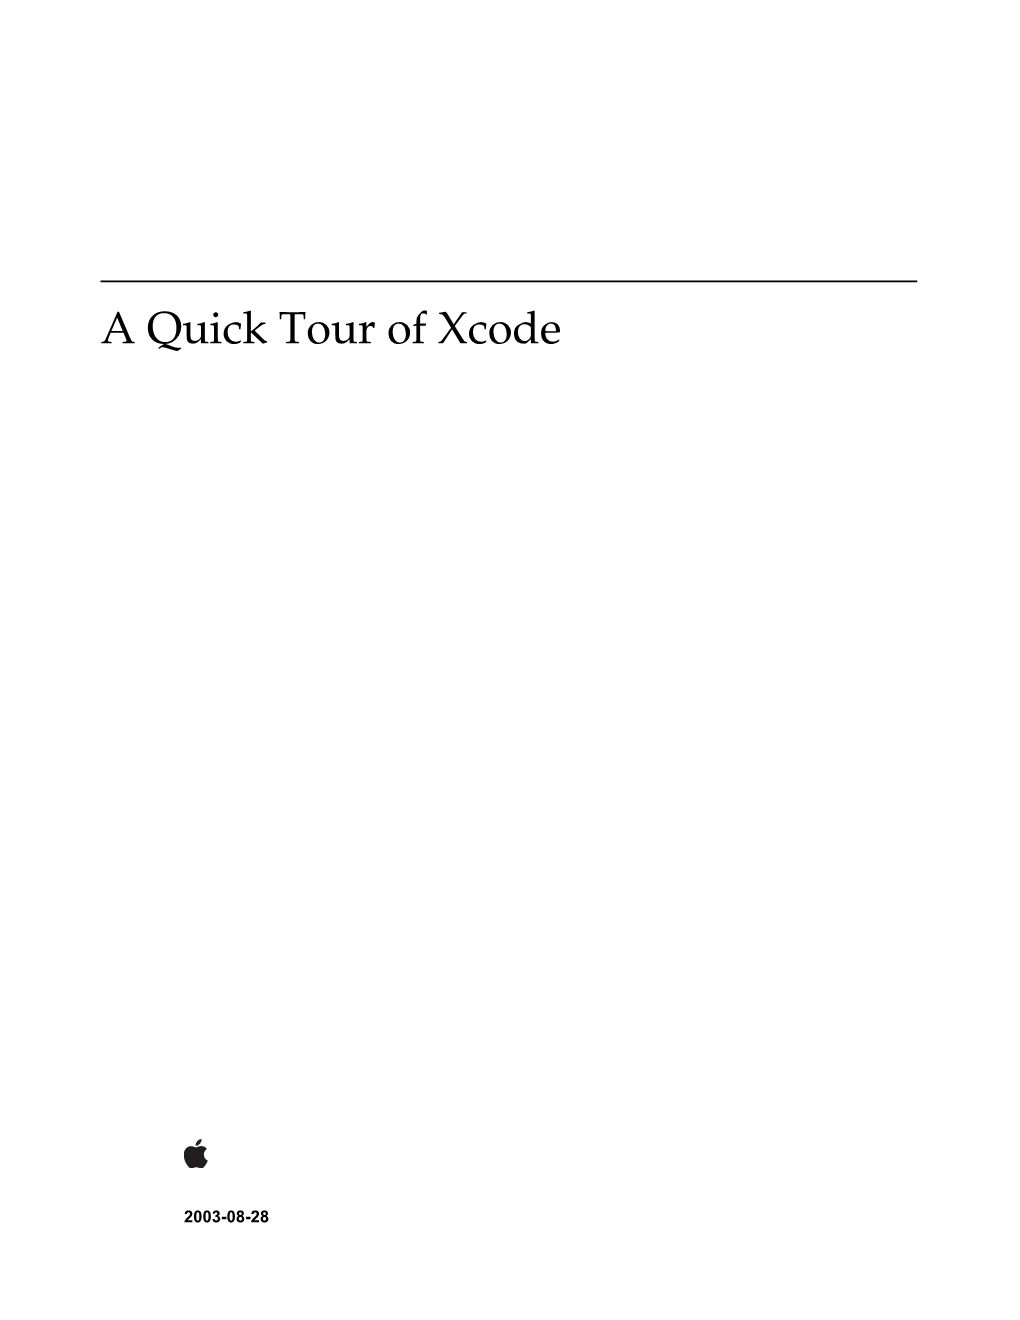 A Quick Tour of Xcode